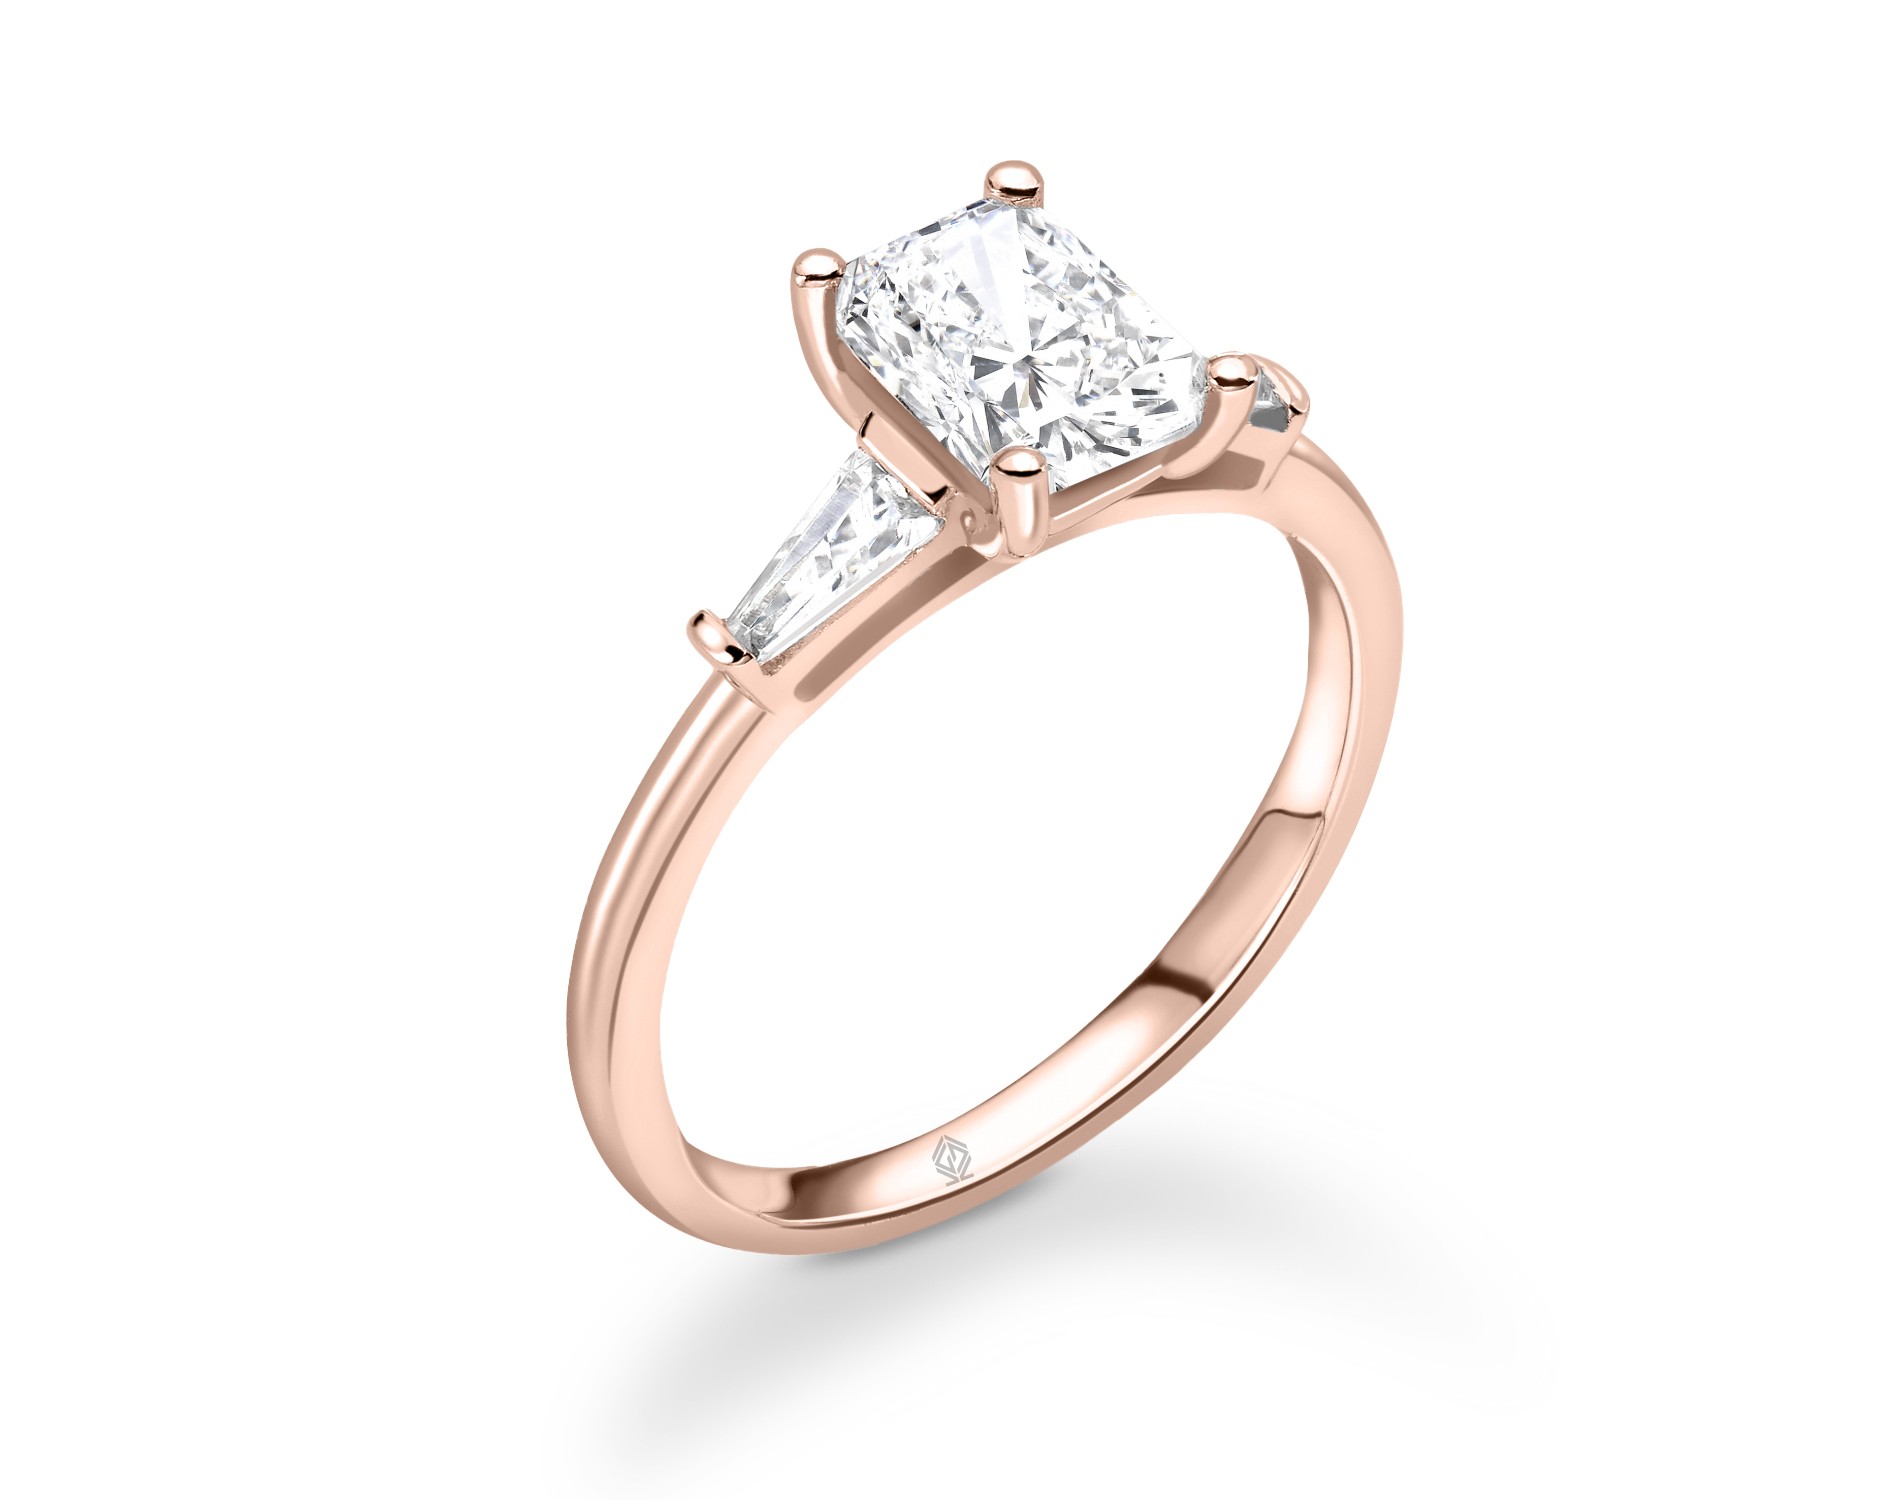 18K ROSE GOLD CUSHION CUT DIAMOND ENGAGEMENT RING WITH BAGUETTES CUT SIDE STONES